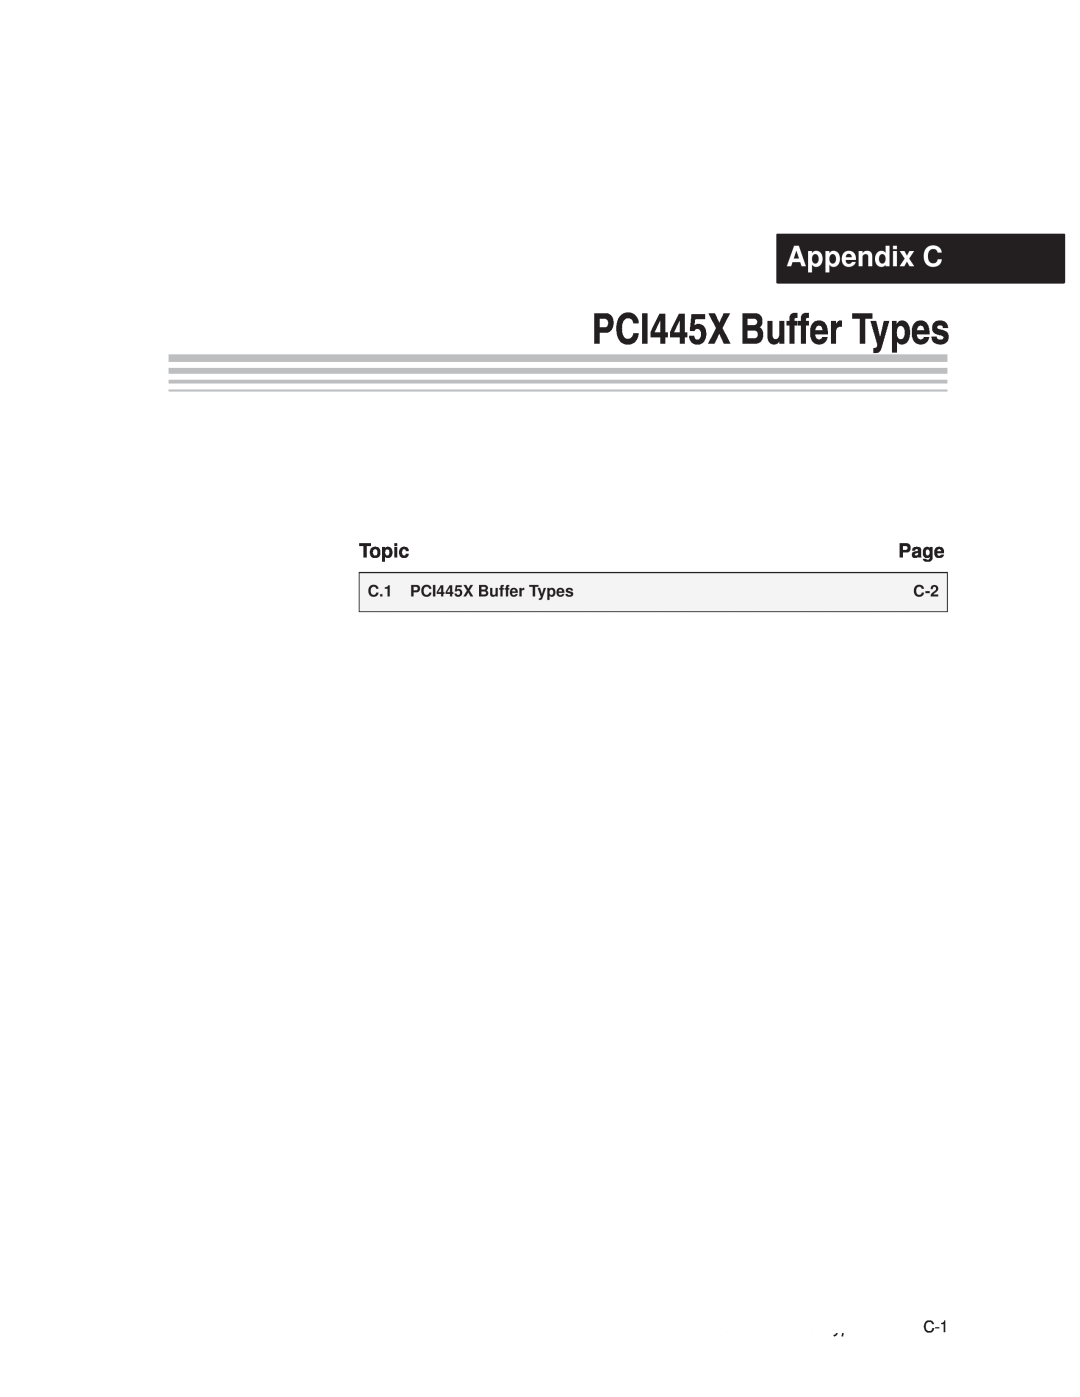 Texas Instruments manual PCI445X Buffer Types, Appendix C, Topic, Page 